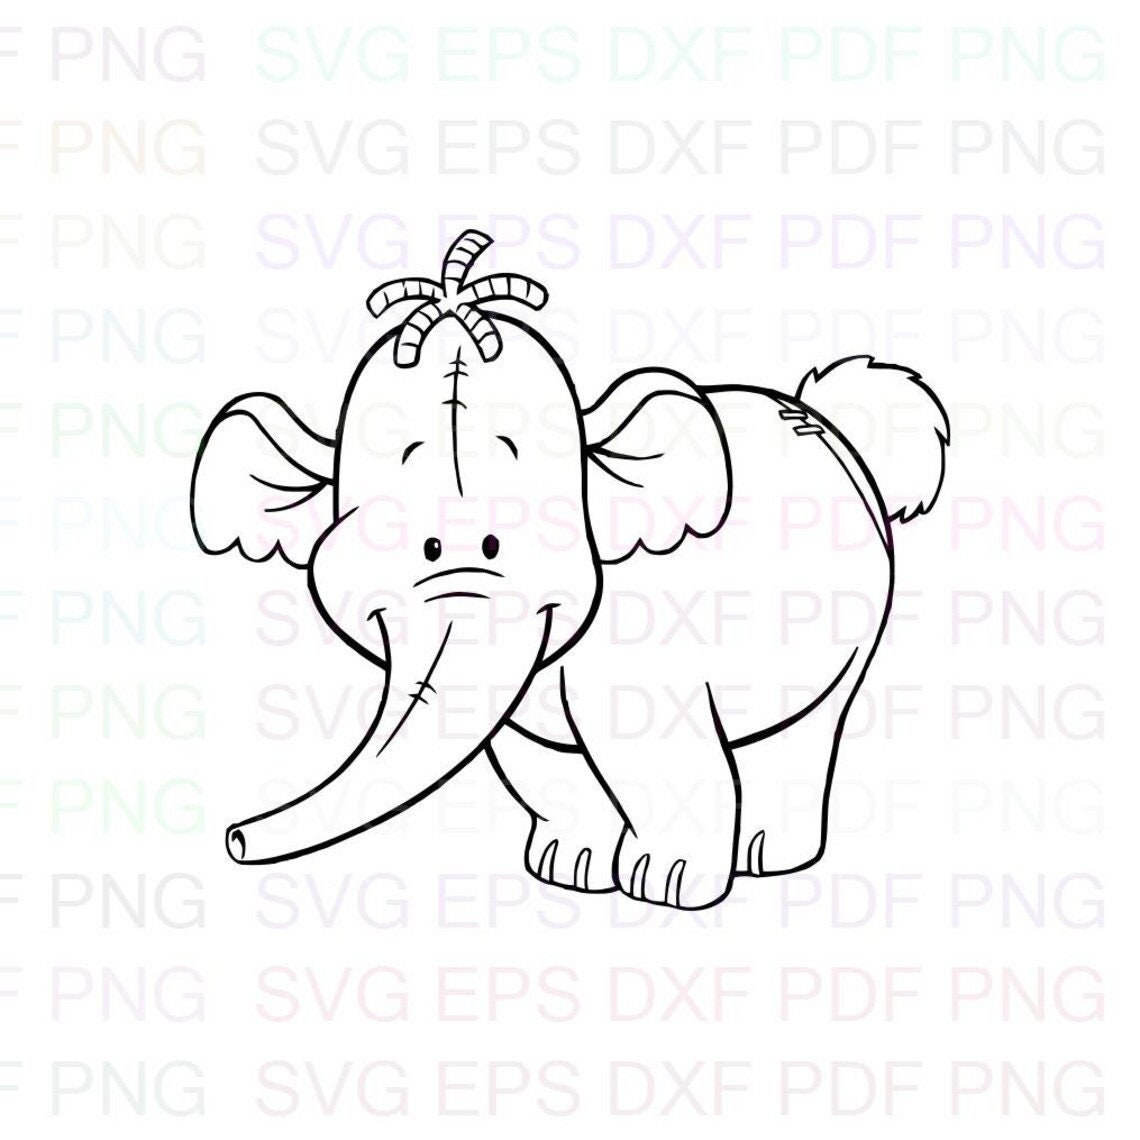 winnie the pooh lumpy coloring pages